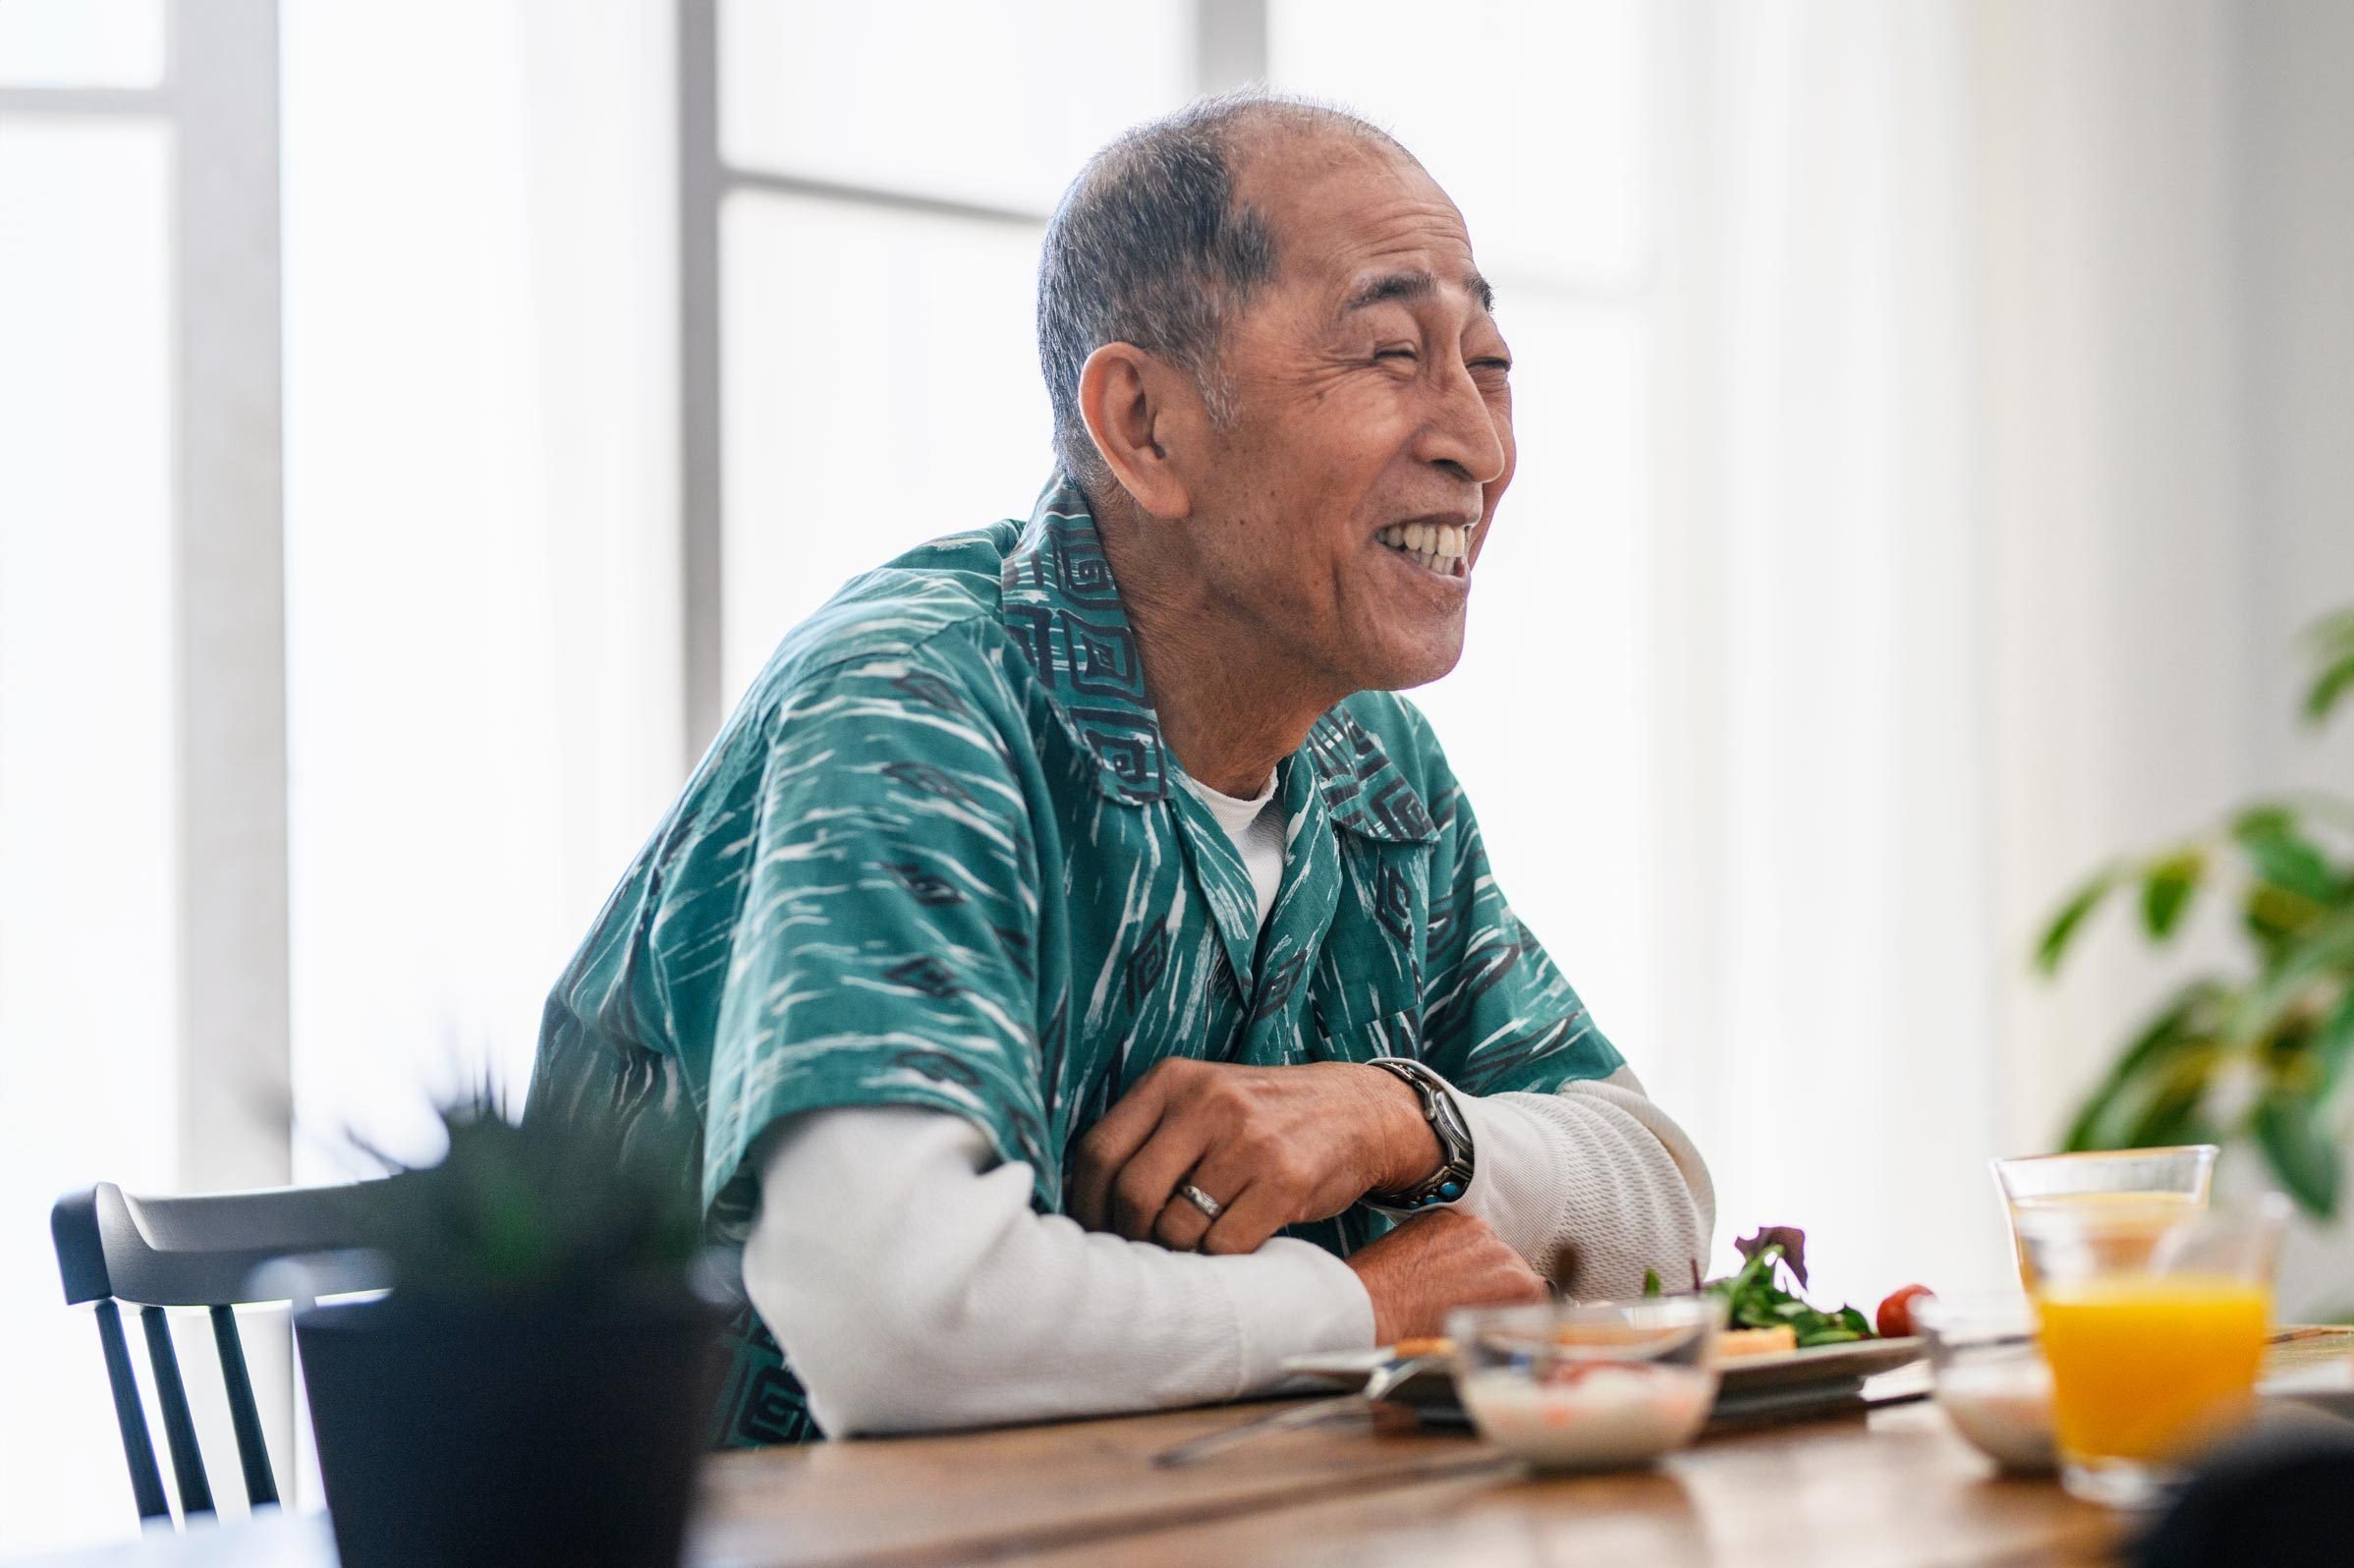 Want To Slow Aging? Follow the Diet of Older Japanese Men, Says New Study